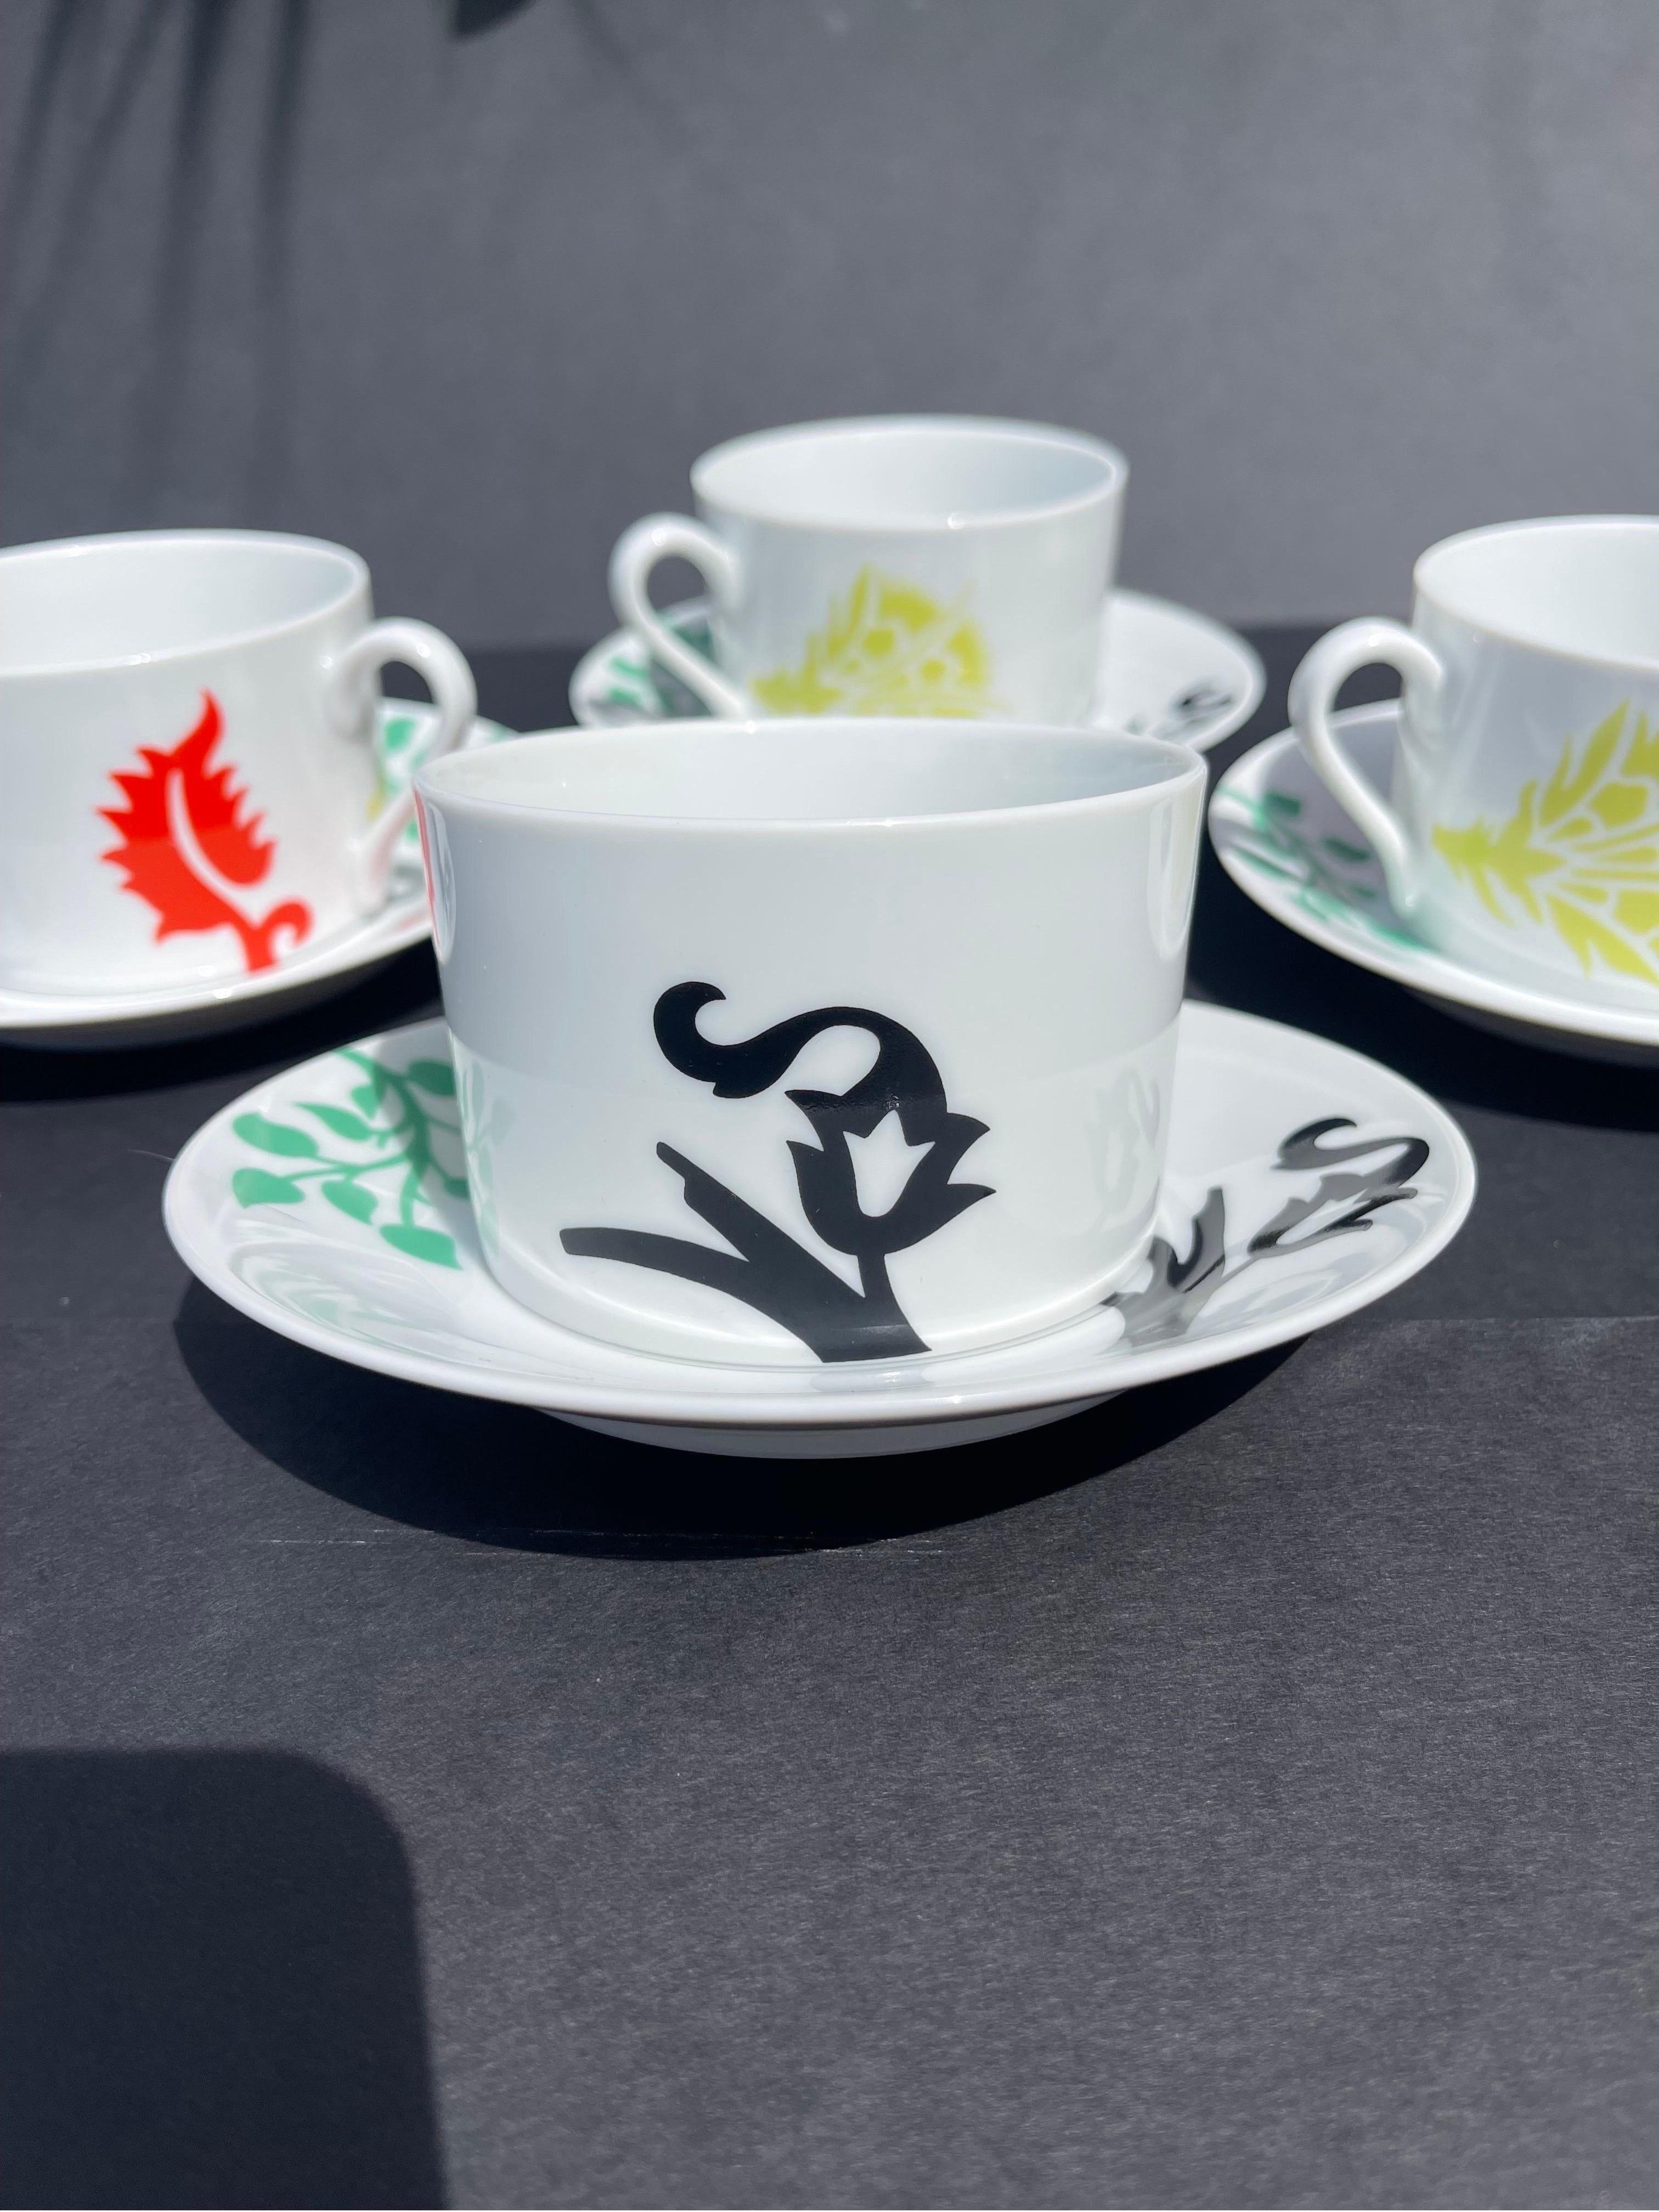 Exceptionally rare set of cups & saucers by the inimitable Ettore Sottsass, designed for Swid Powell. This set is held in the private collections of prominent museums, such as The Met, and is only available for sale here. Don’t miss your chance to